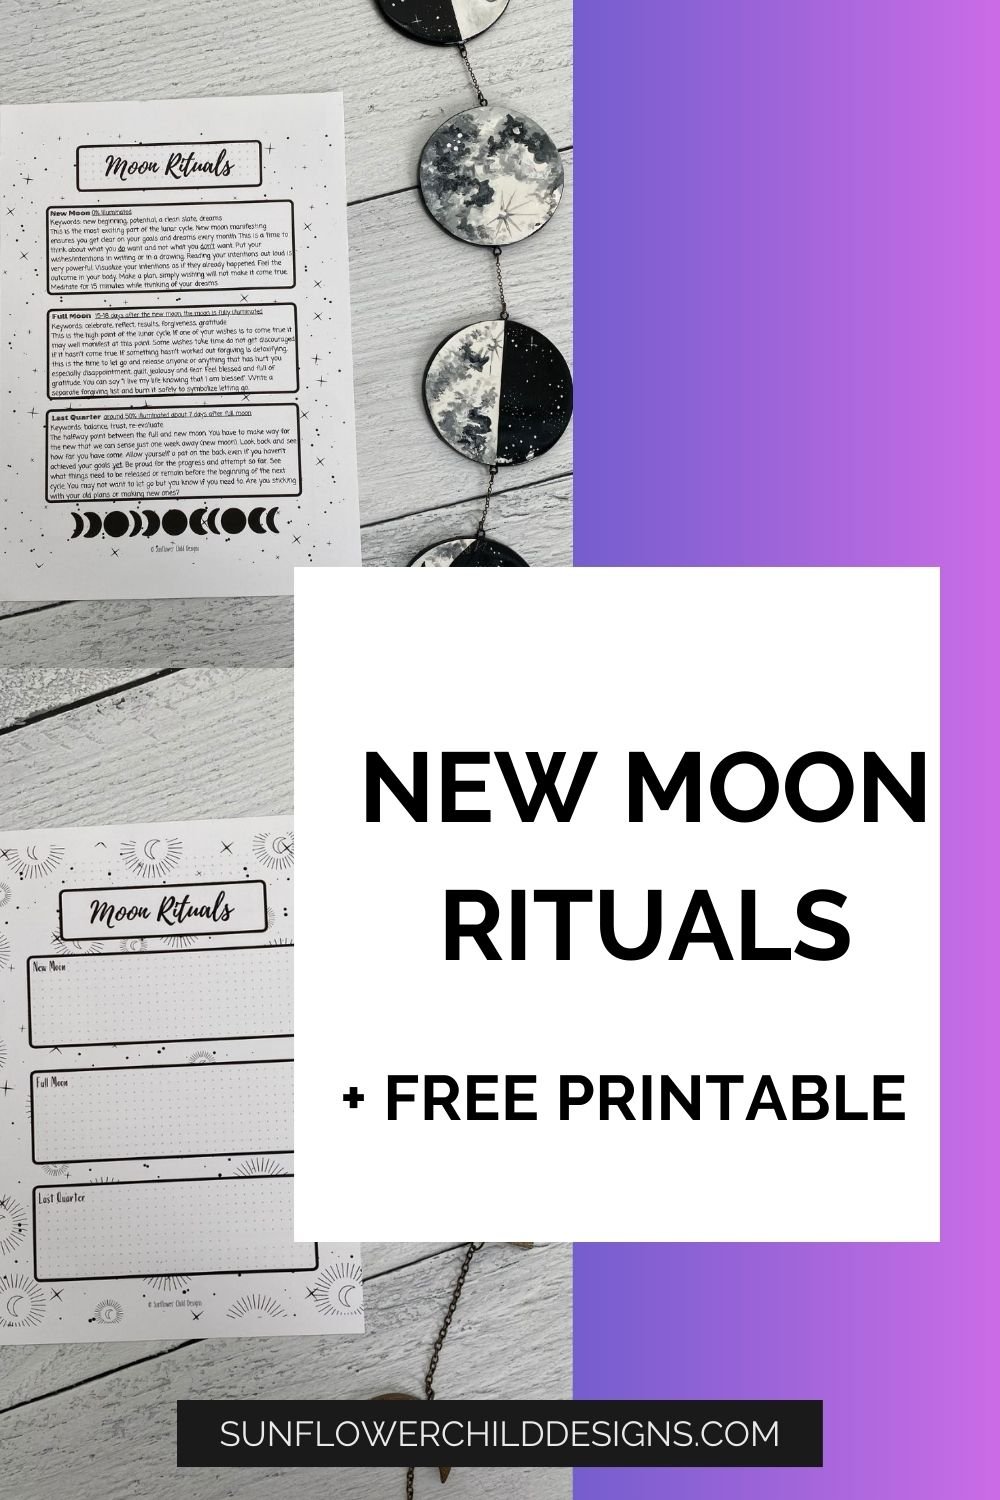 New and Full Moon Rituals — The Lunar Cycle Peak